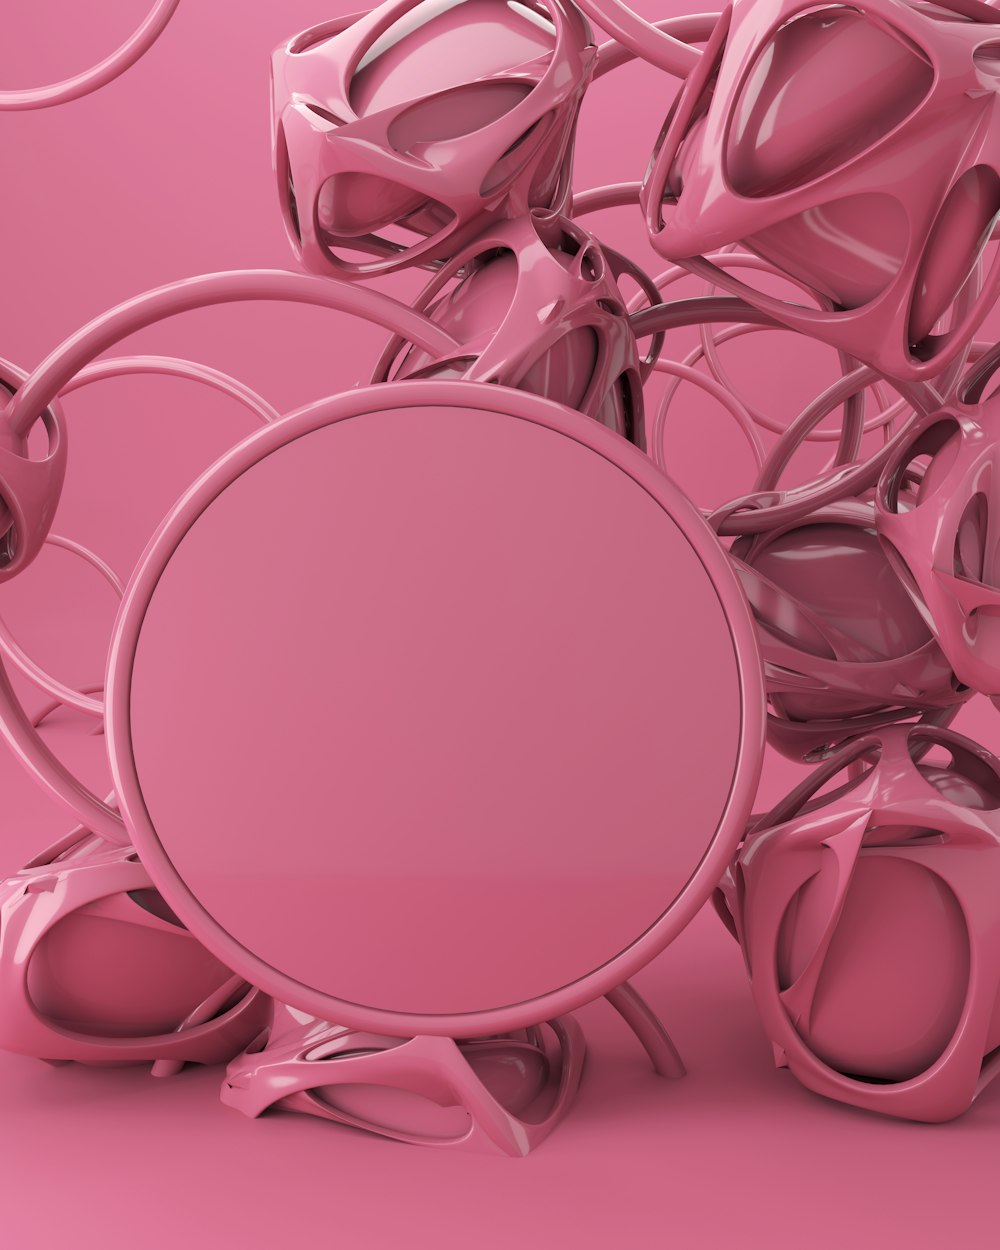 pink and white round illustration